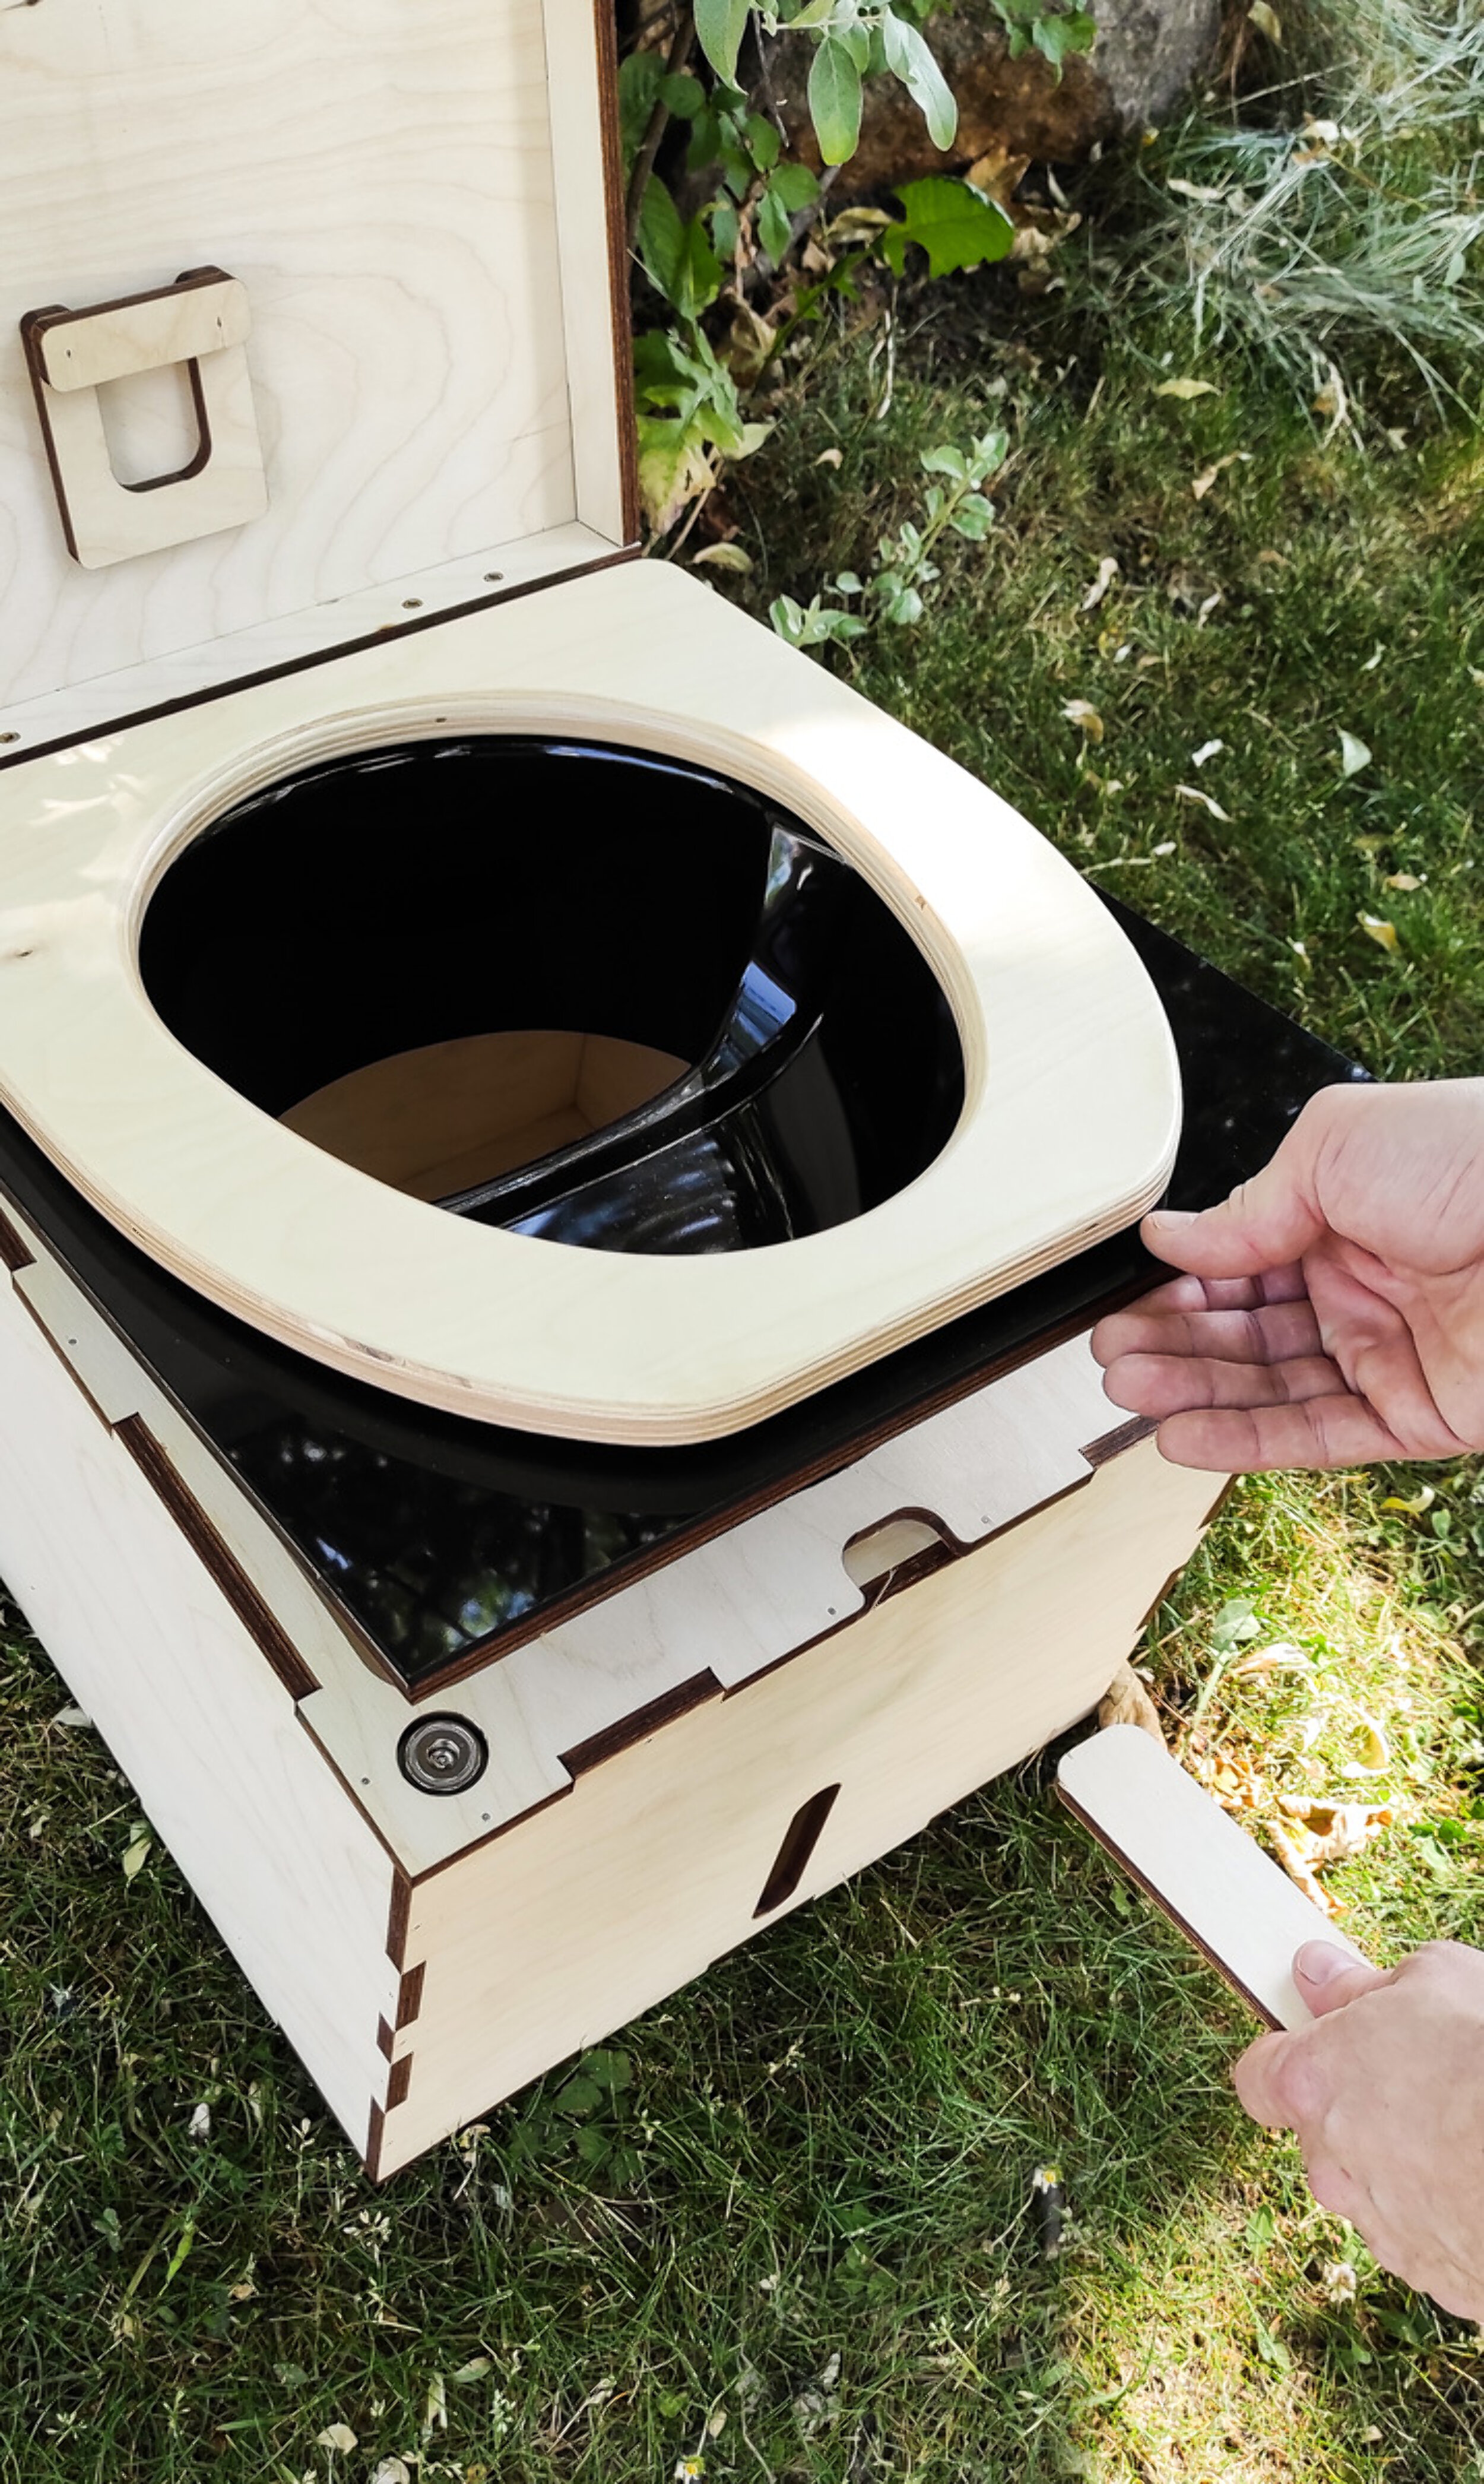 With our PiccoLoo composting toilet, the urine diverter is attached with magnets and the toilet seat can be closed magnetically